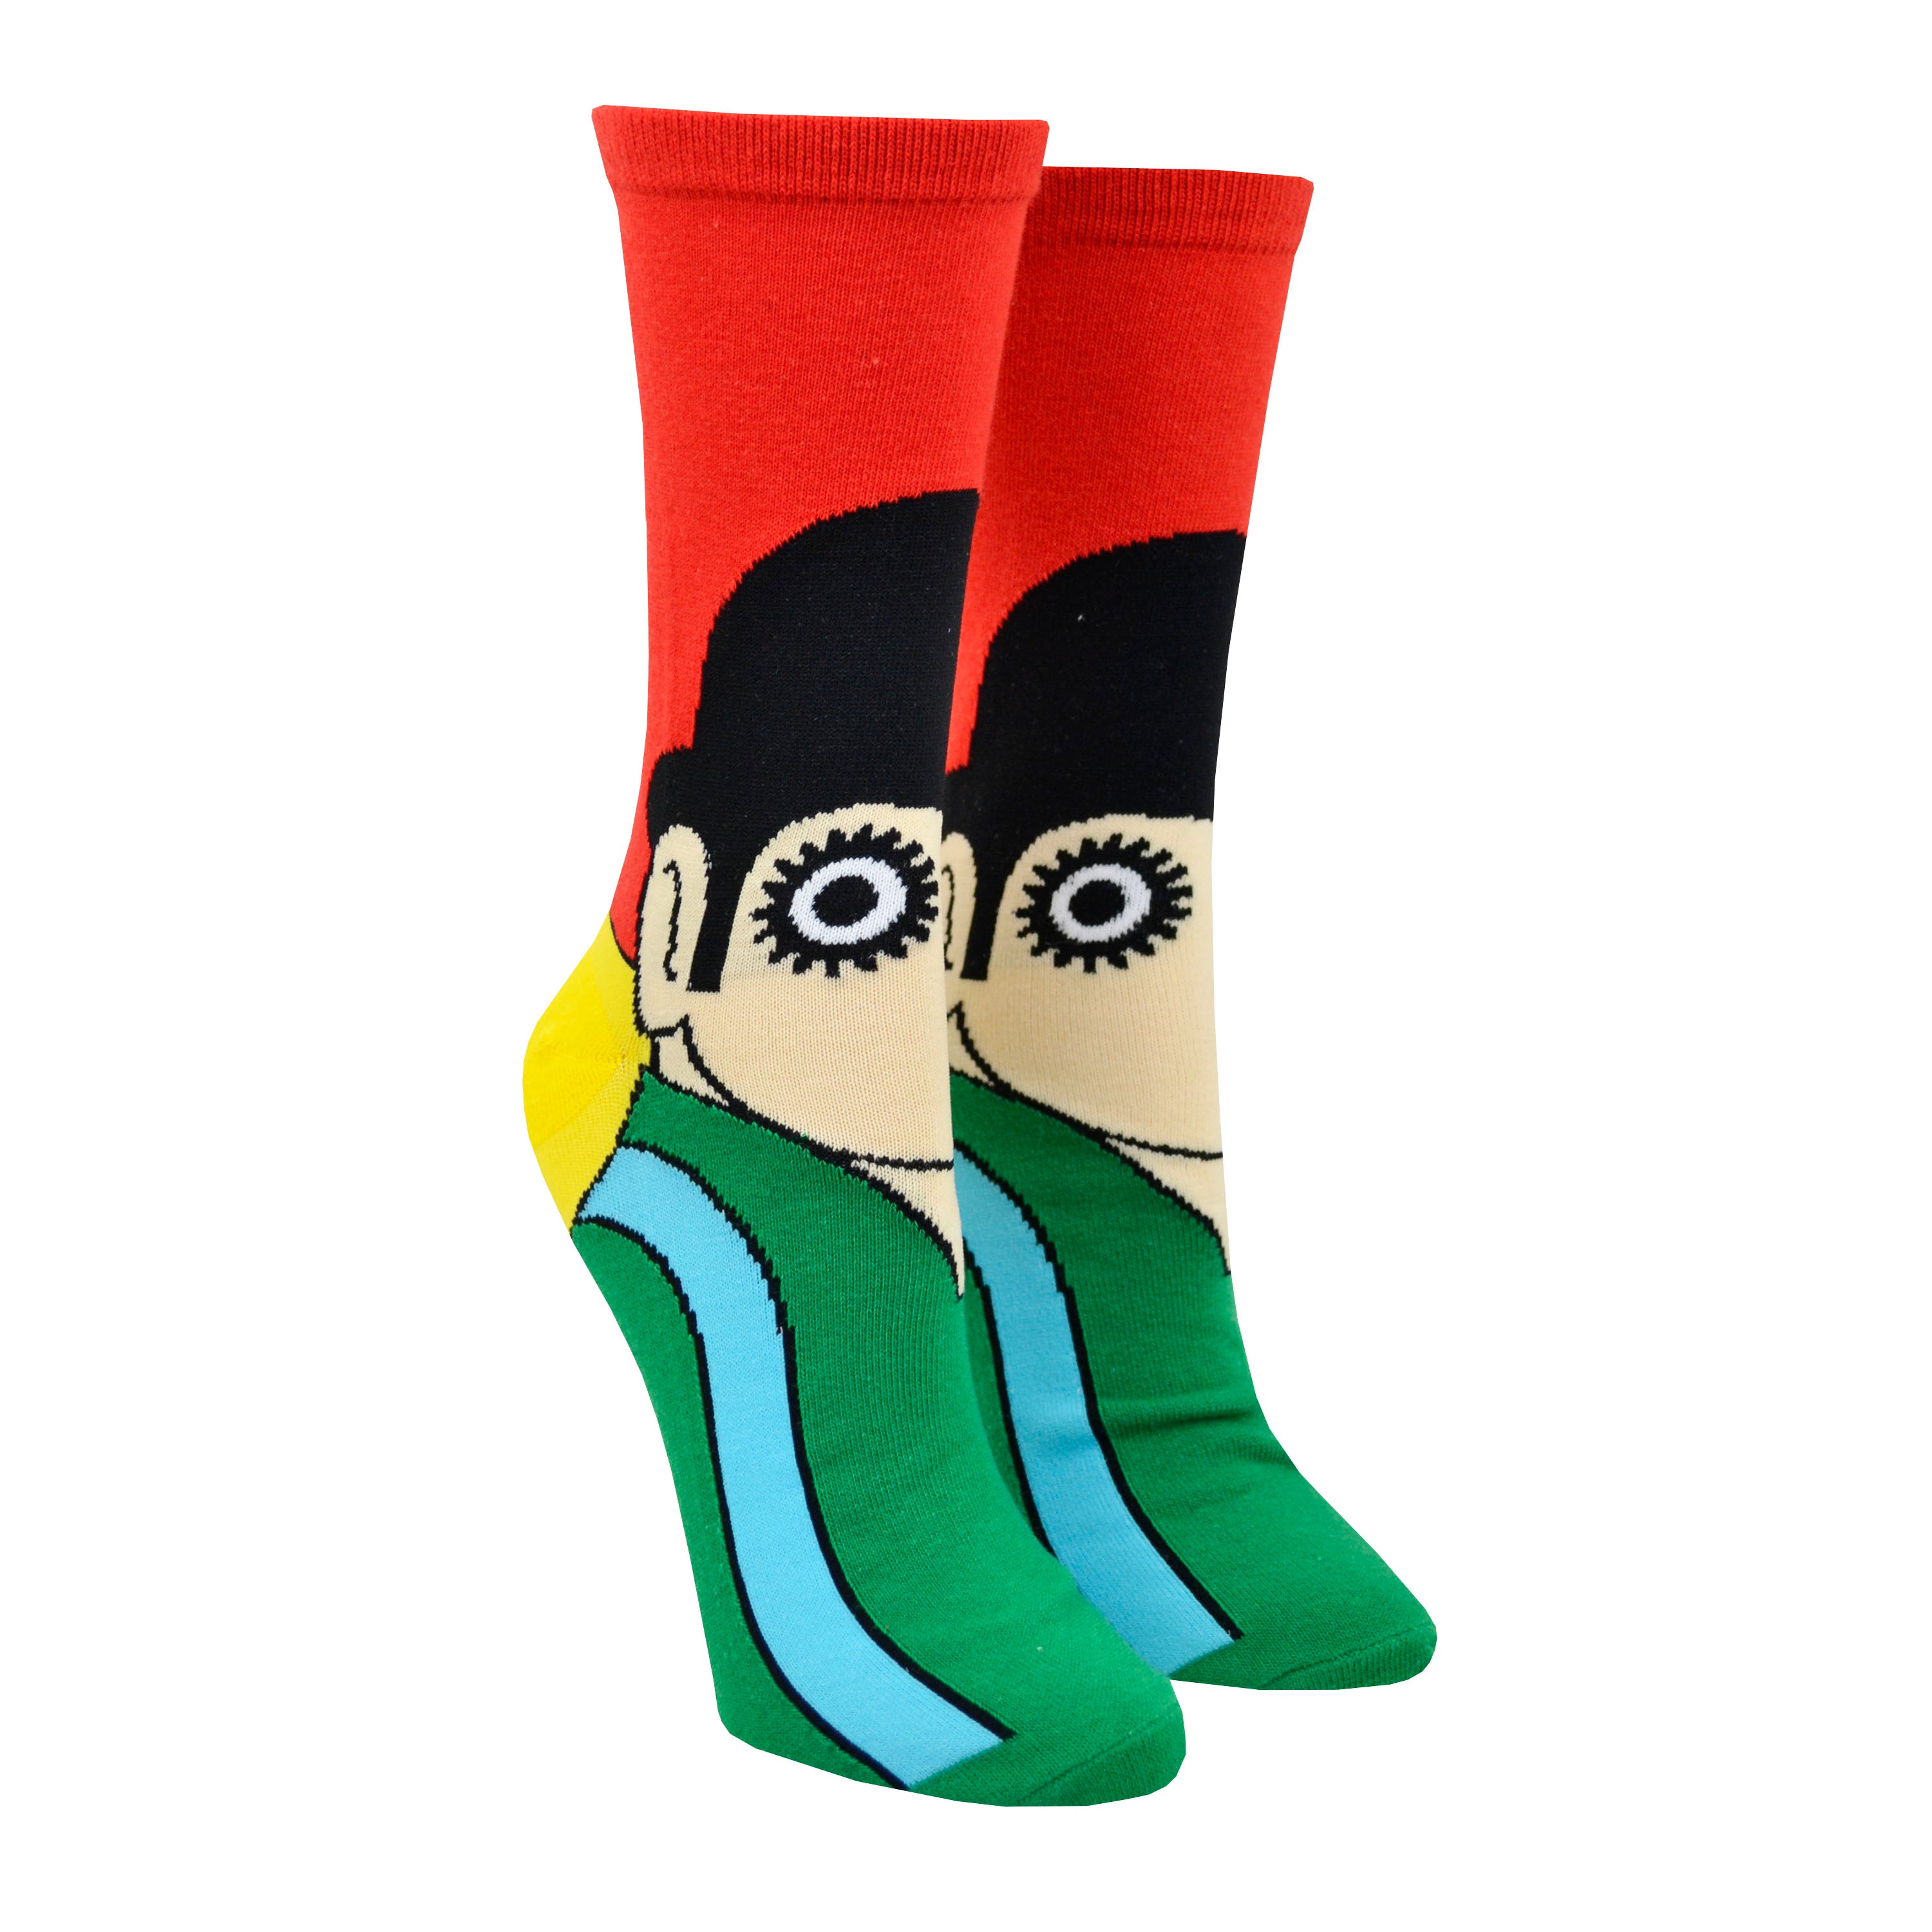 Shown on foot forms, a pair of Out of Print brand unisex cotton crew sock featuring the 1972 cover of the novel A Clockwork Orange by Anthony Burgess. This image is known as the 'cog eyed droog' with a red background, a black bowler hat, a single eye, and a green shirt.